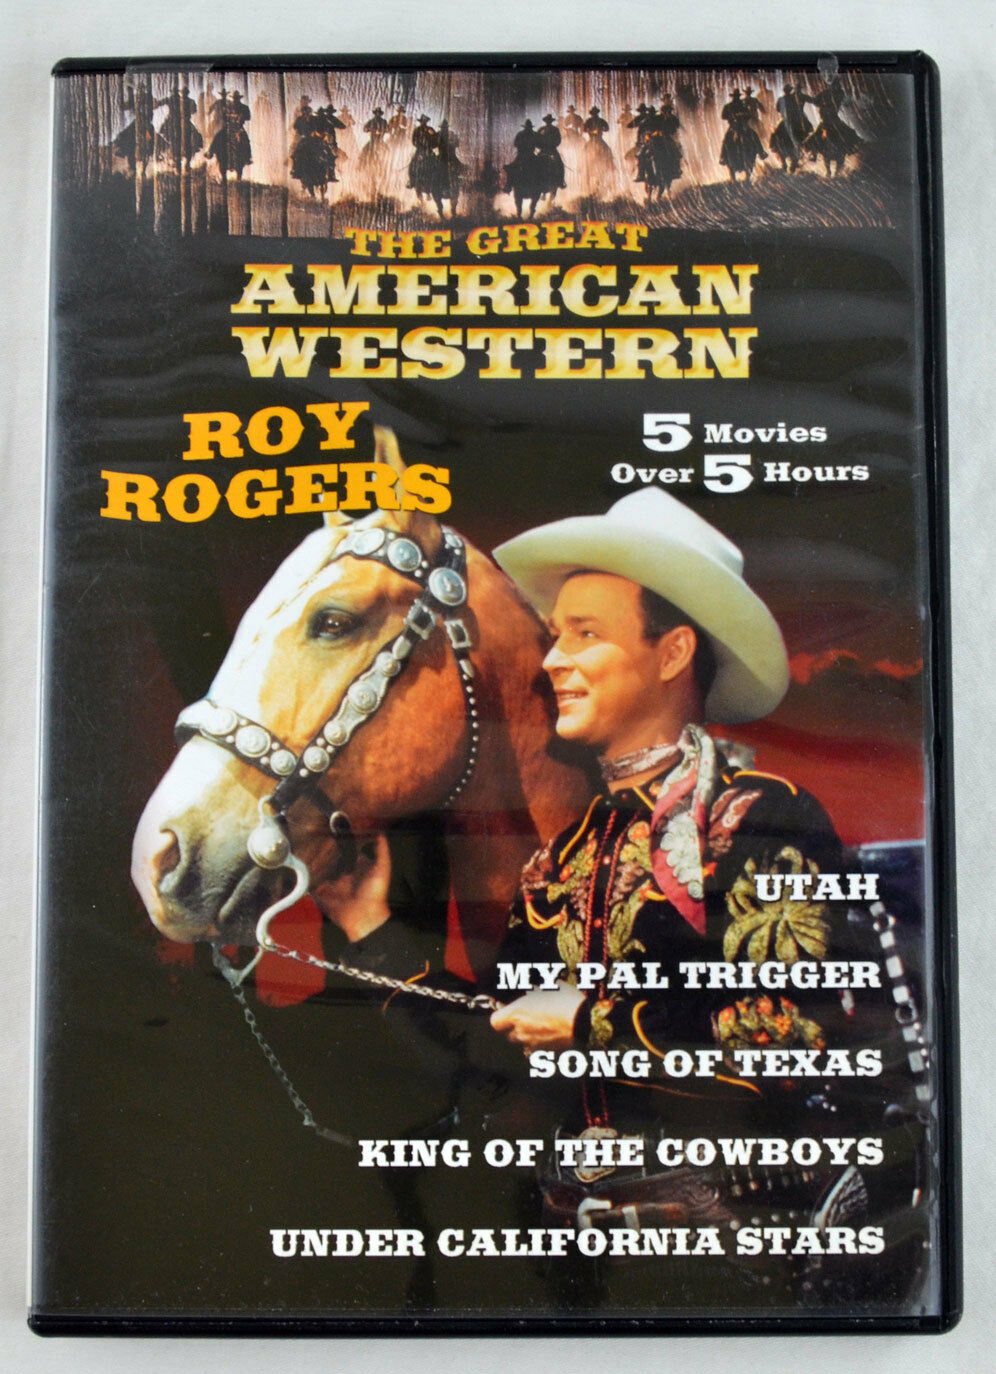 The Great American Western - Roy Rogers (DVD, 2003, Five Films on One Disc)